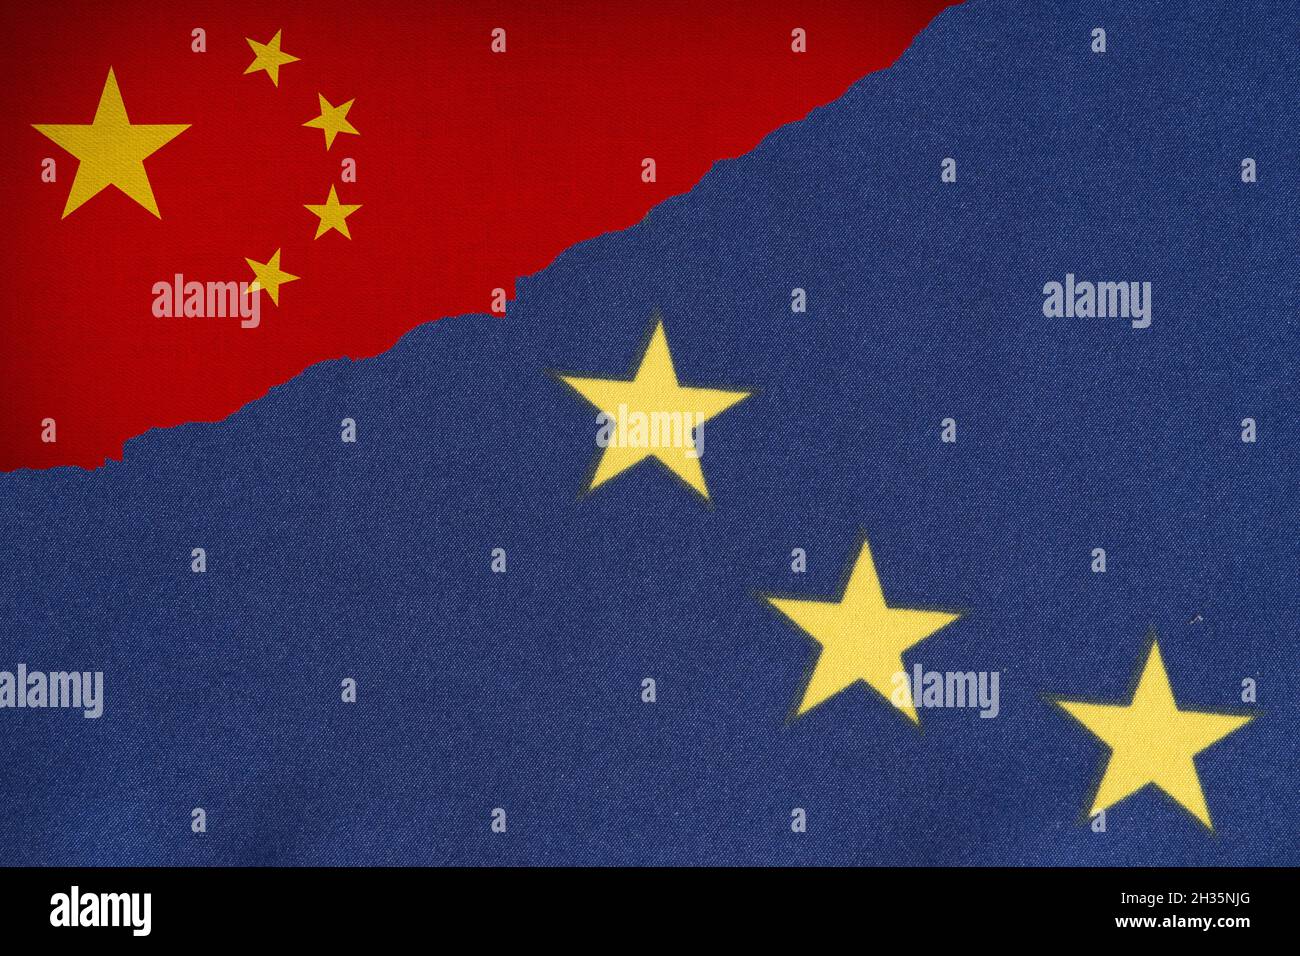 Flags of China and the European Union Stock Photo